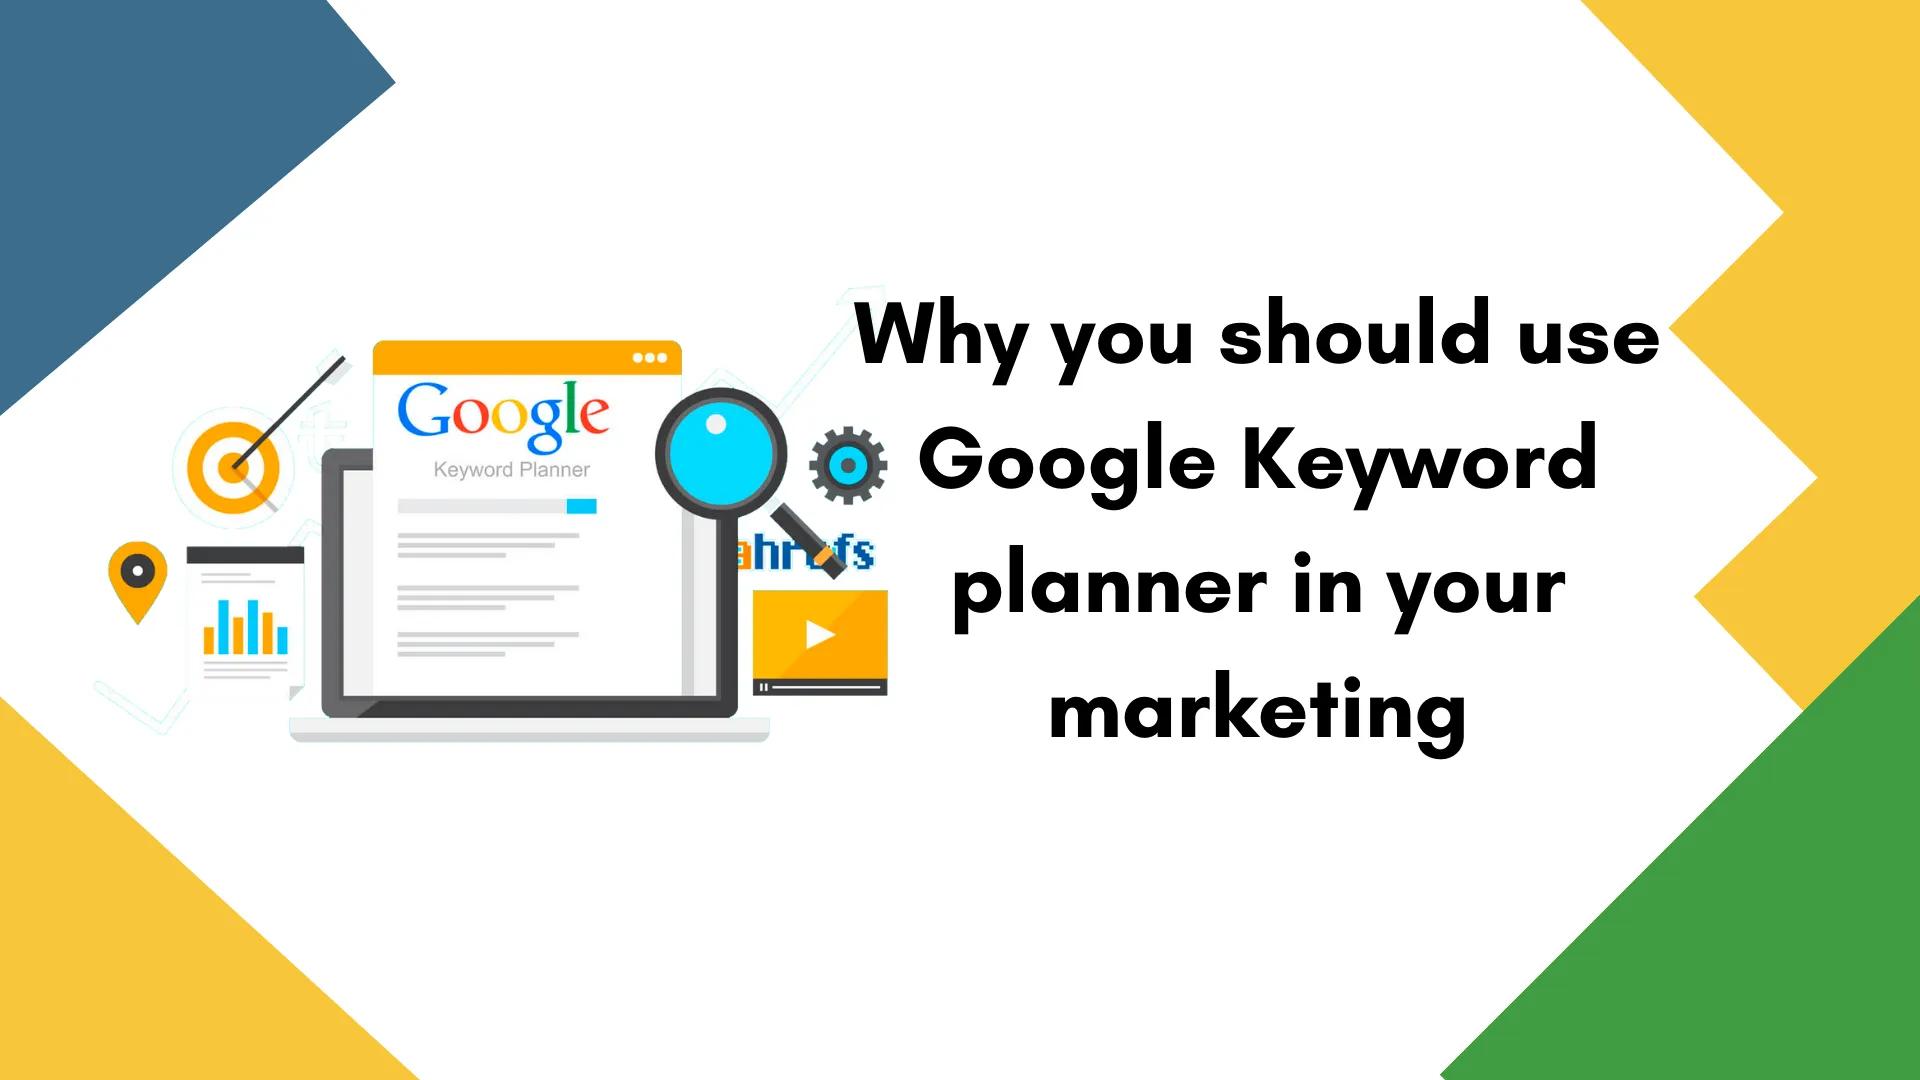 Why you should use Google Keyword Planner in your marketing